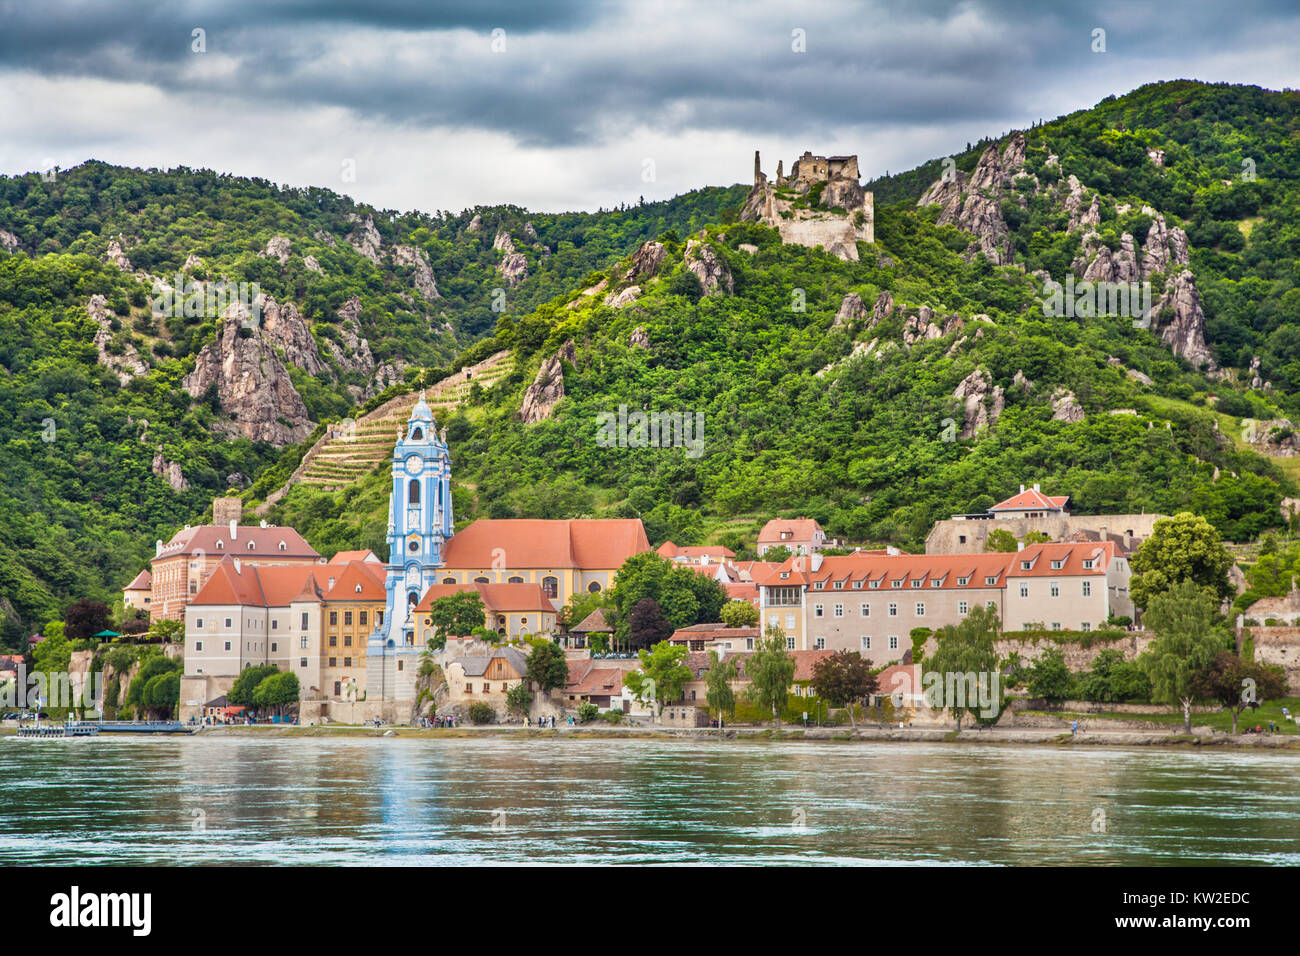 Beautiful landscape with the town of Durnstein and Danube river in the Wachau valley, Lower Austria Stock Photo